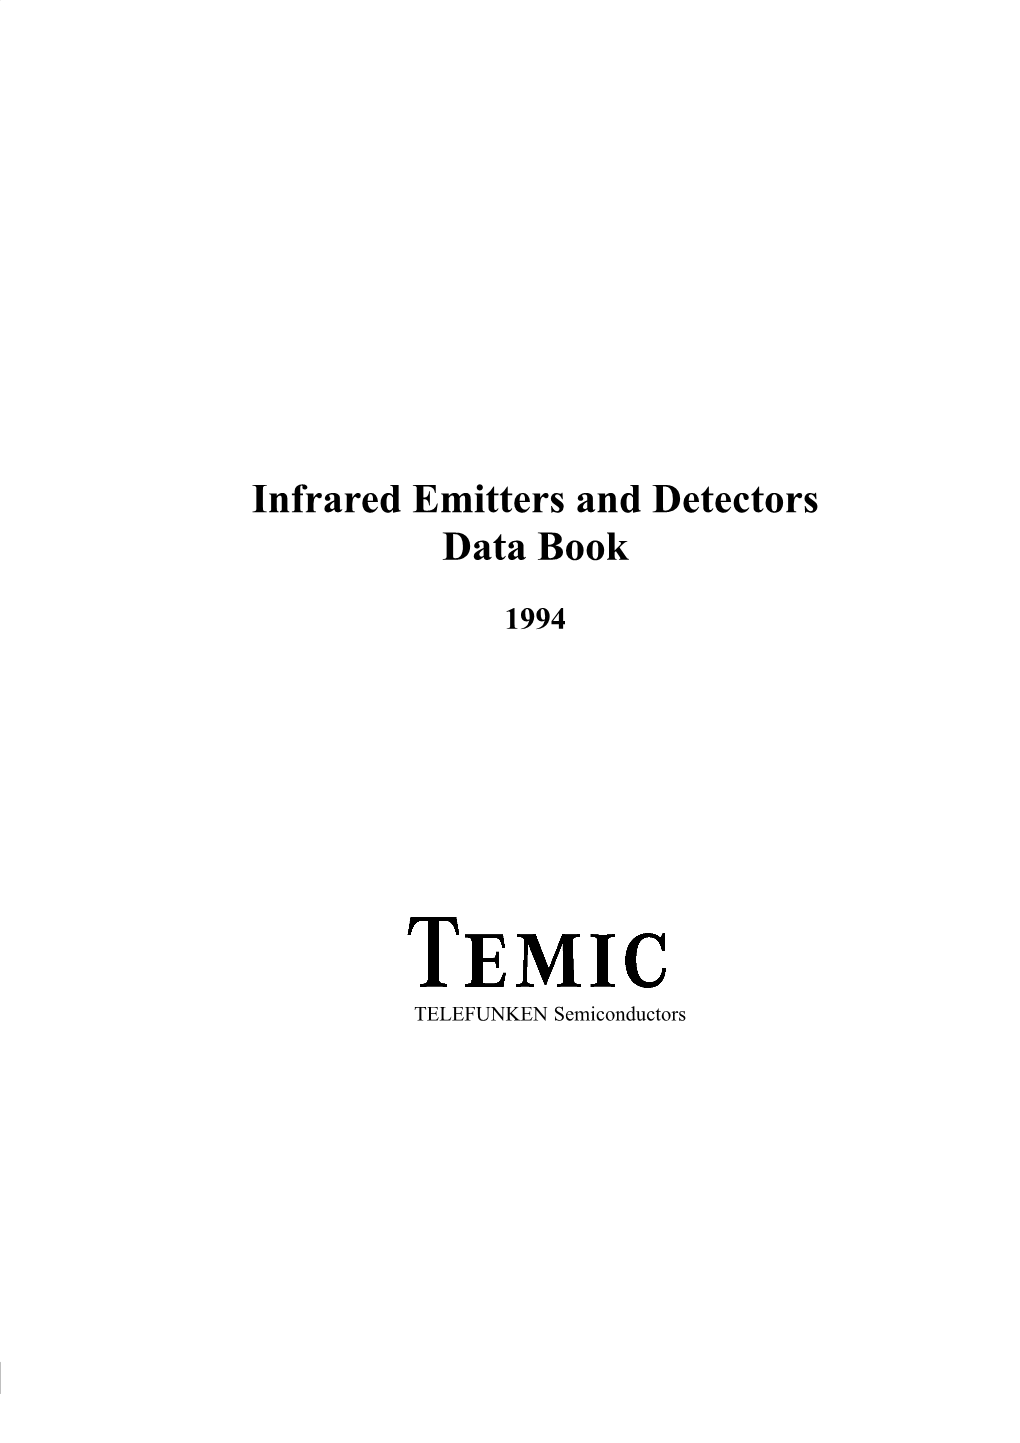 Infrared Emitters and Detectors Data Book